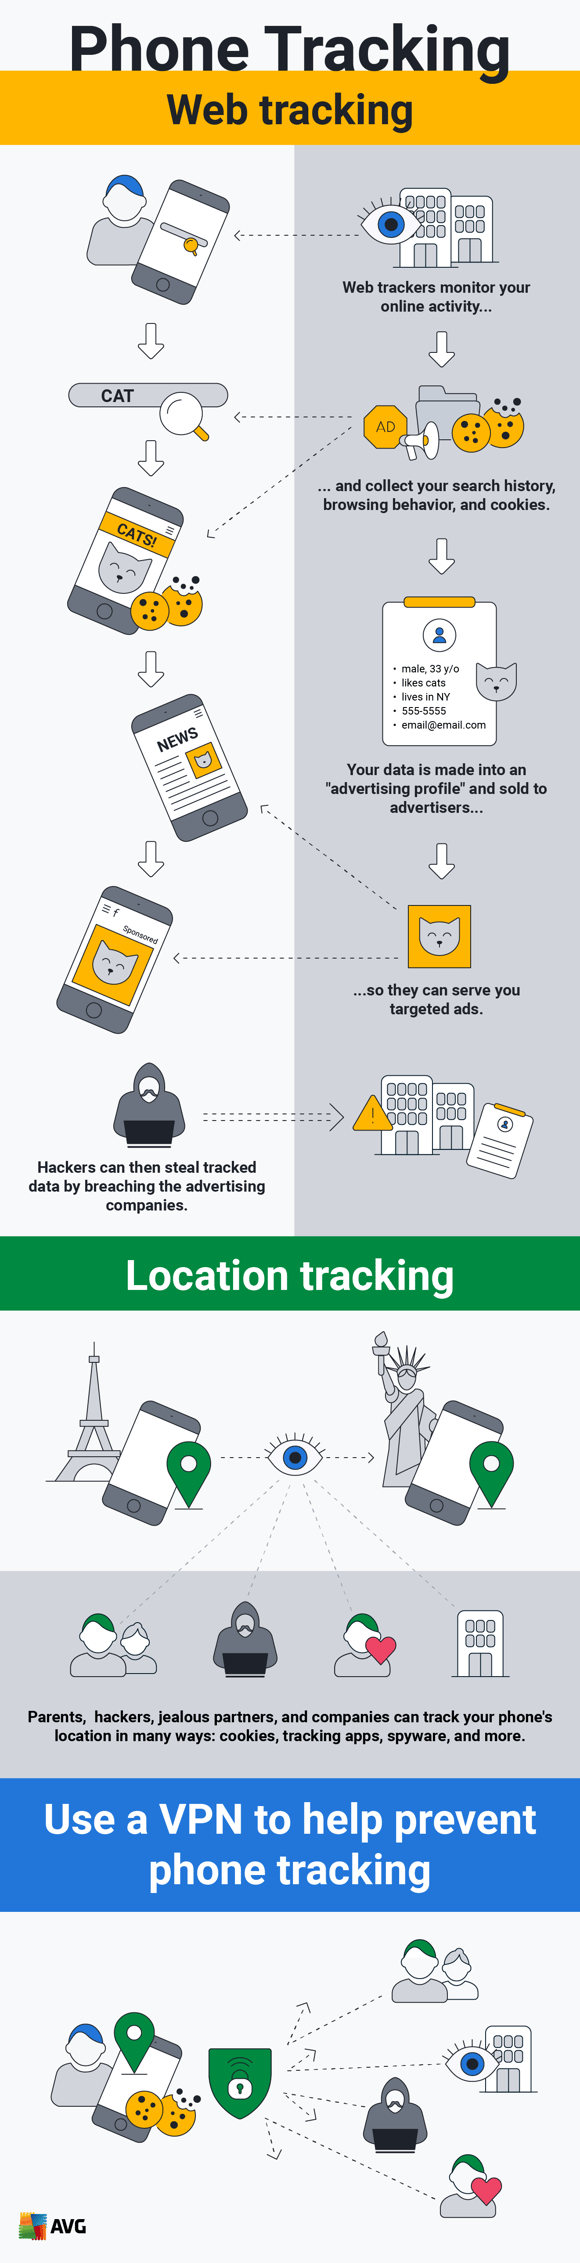 How do I stop my phone from being tracked?